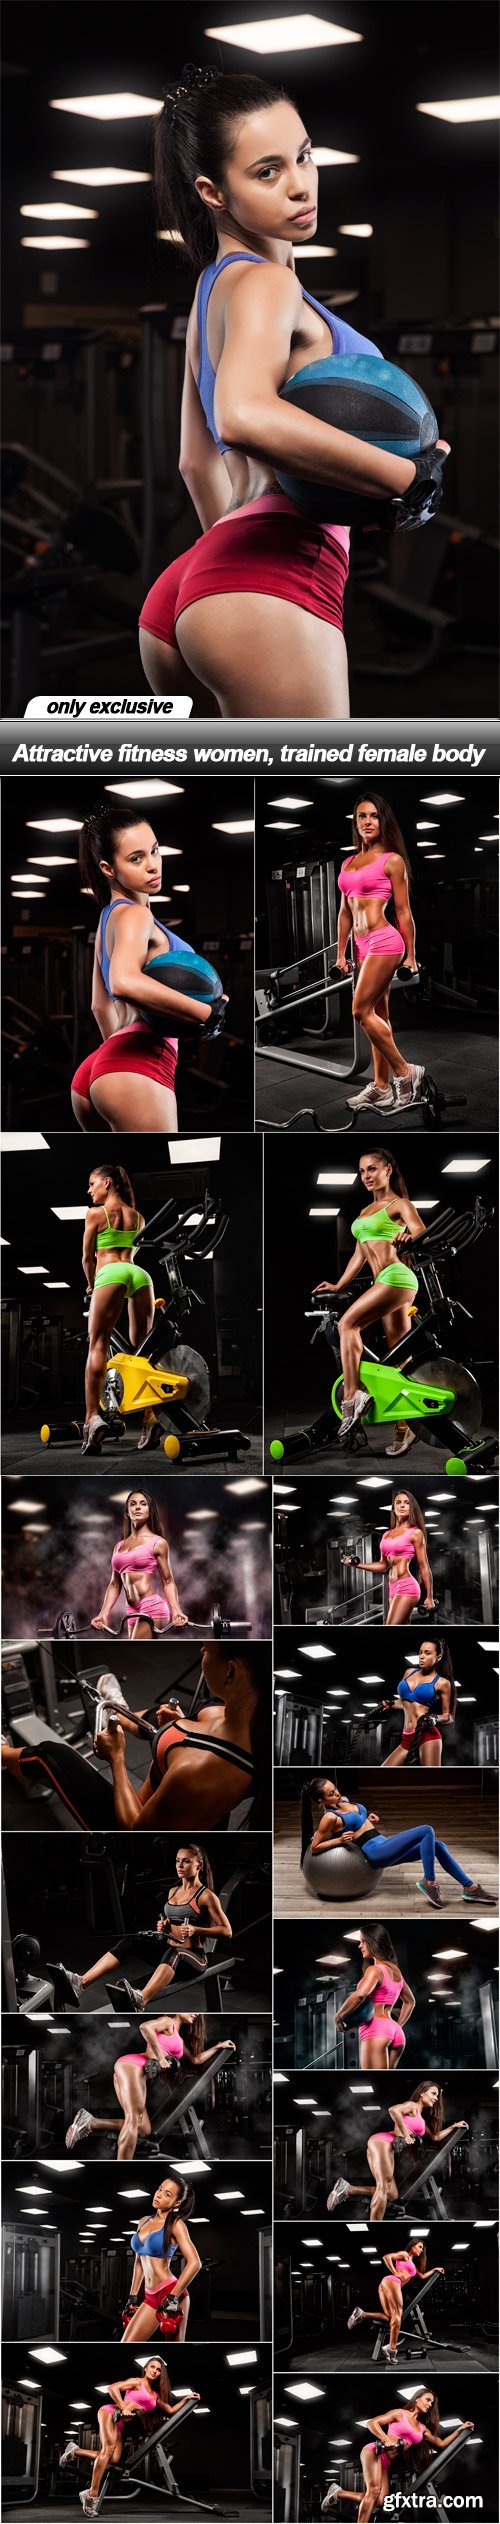 Attractive fitness women, trained female body - 17 UHQ JPEG